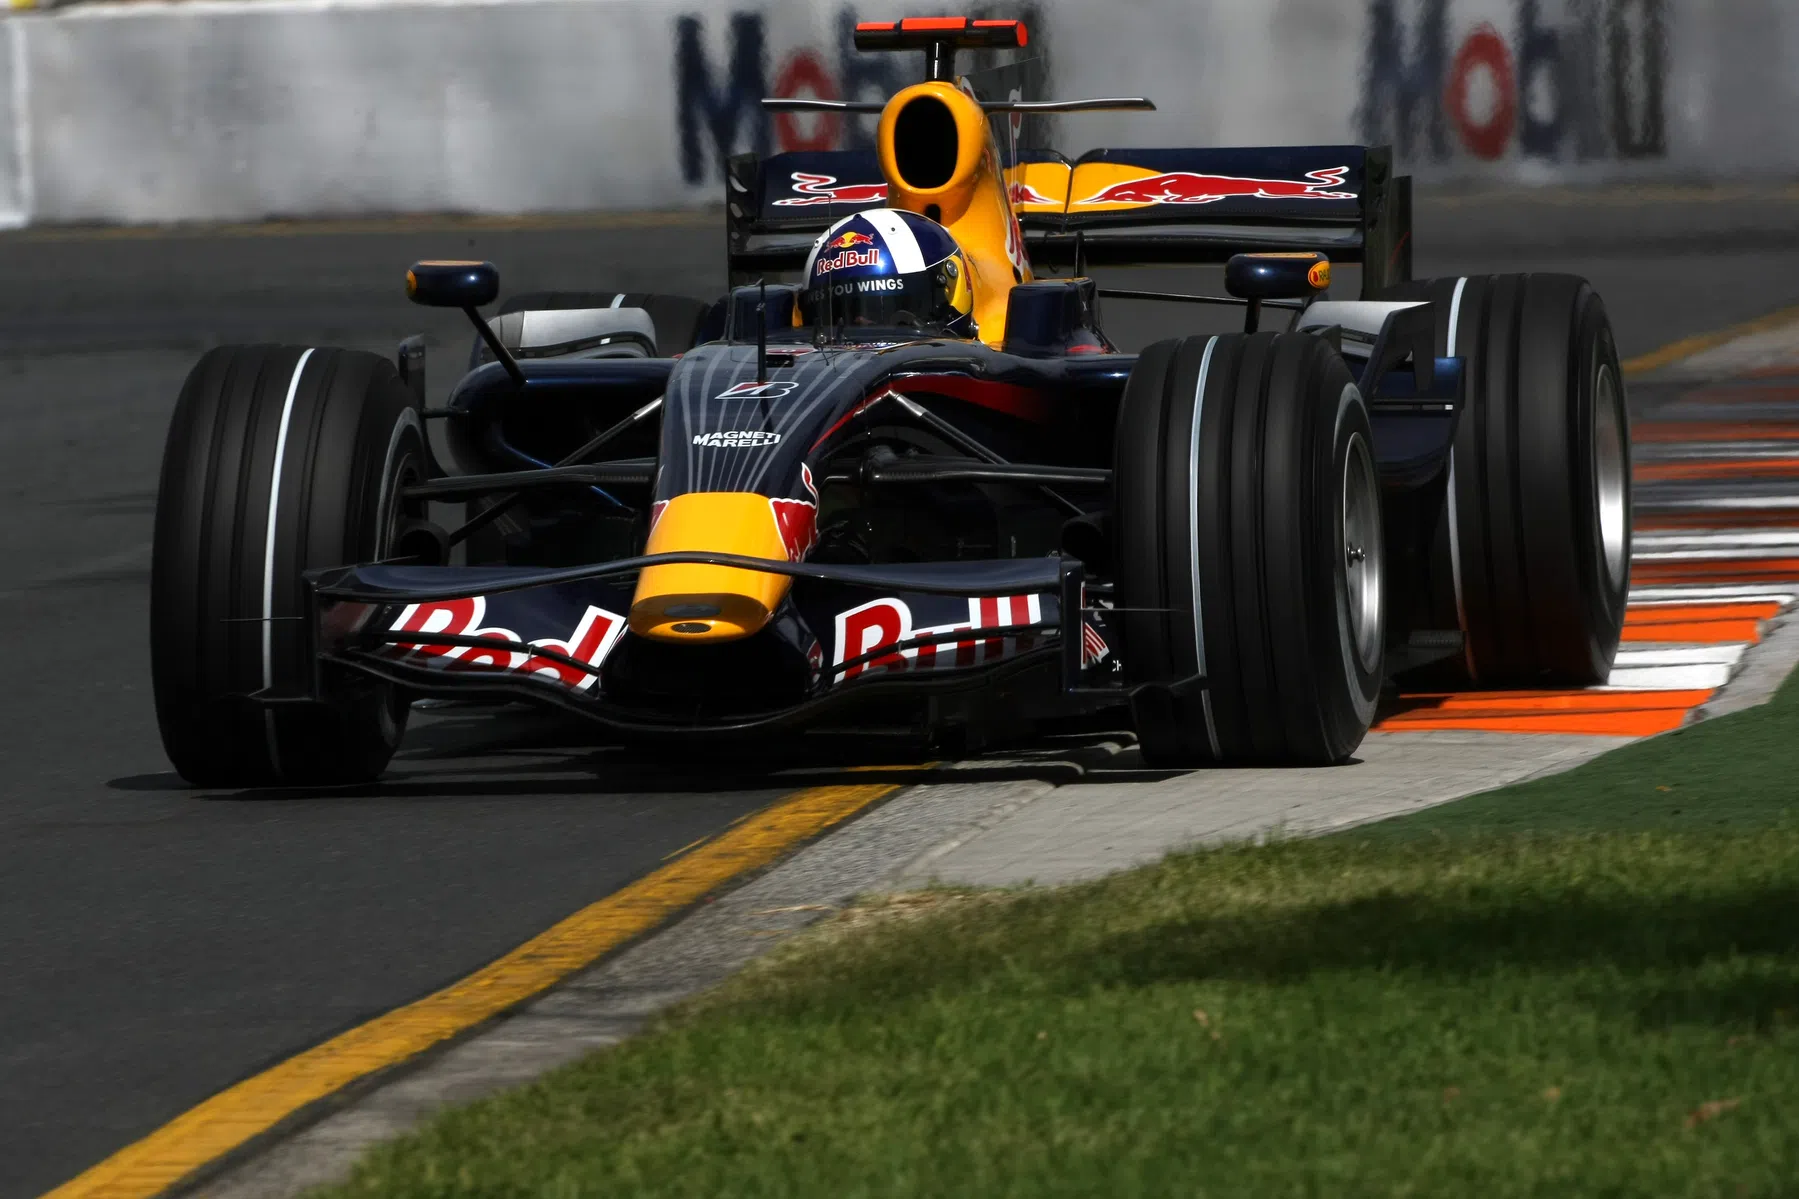 coulthard ubriaco in formula 1